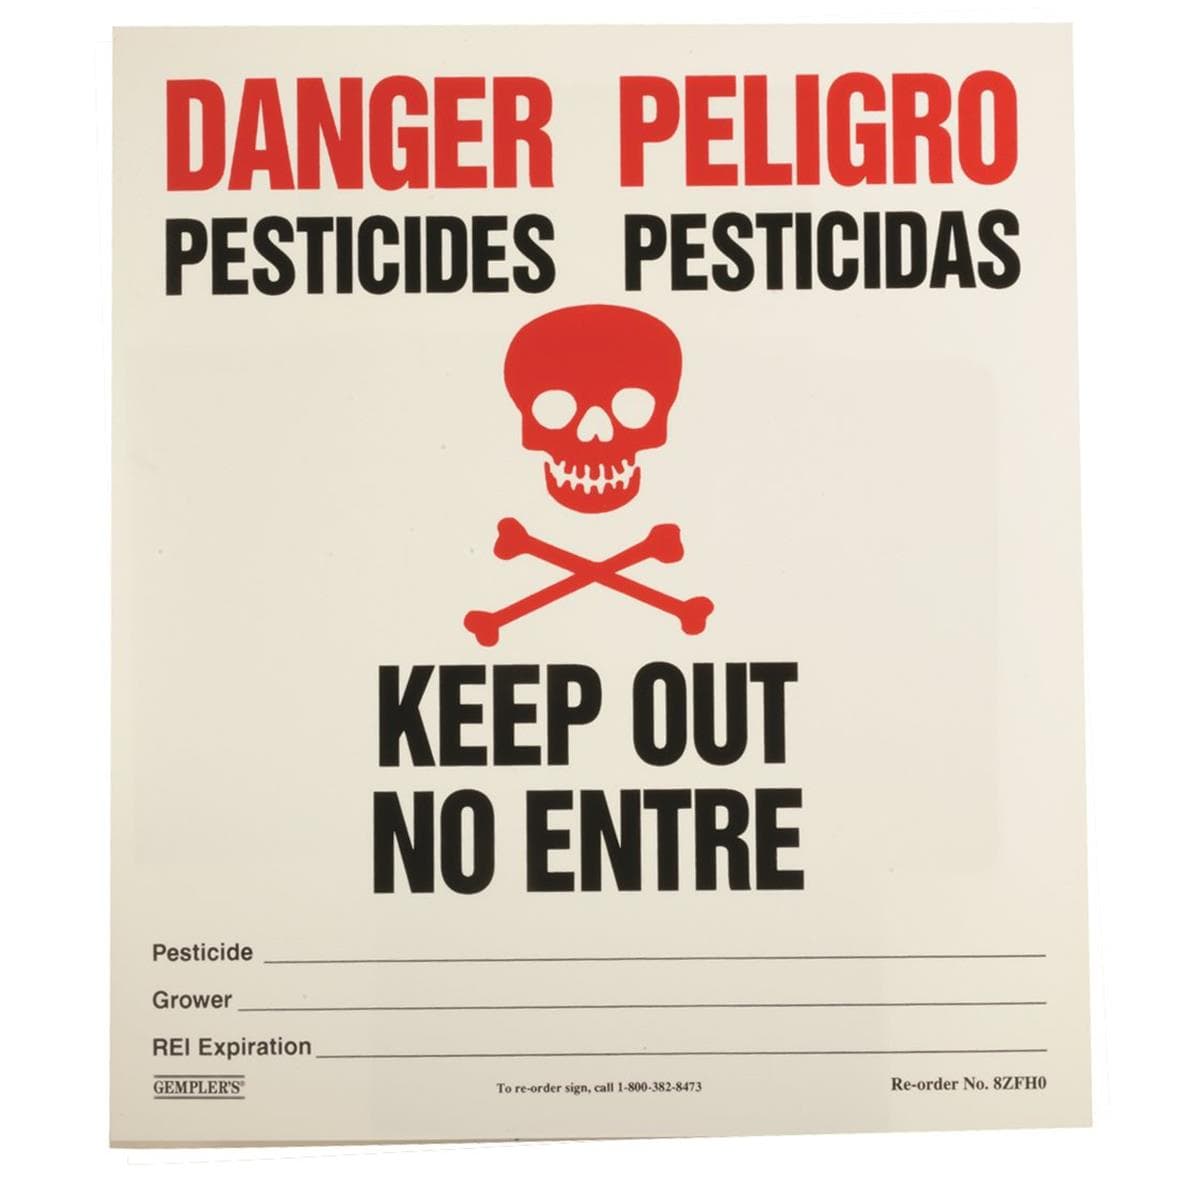 GEMPLER'S 14"W x 16"H California Pesticide Warning Sign